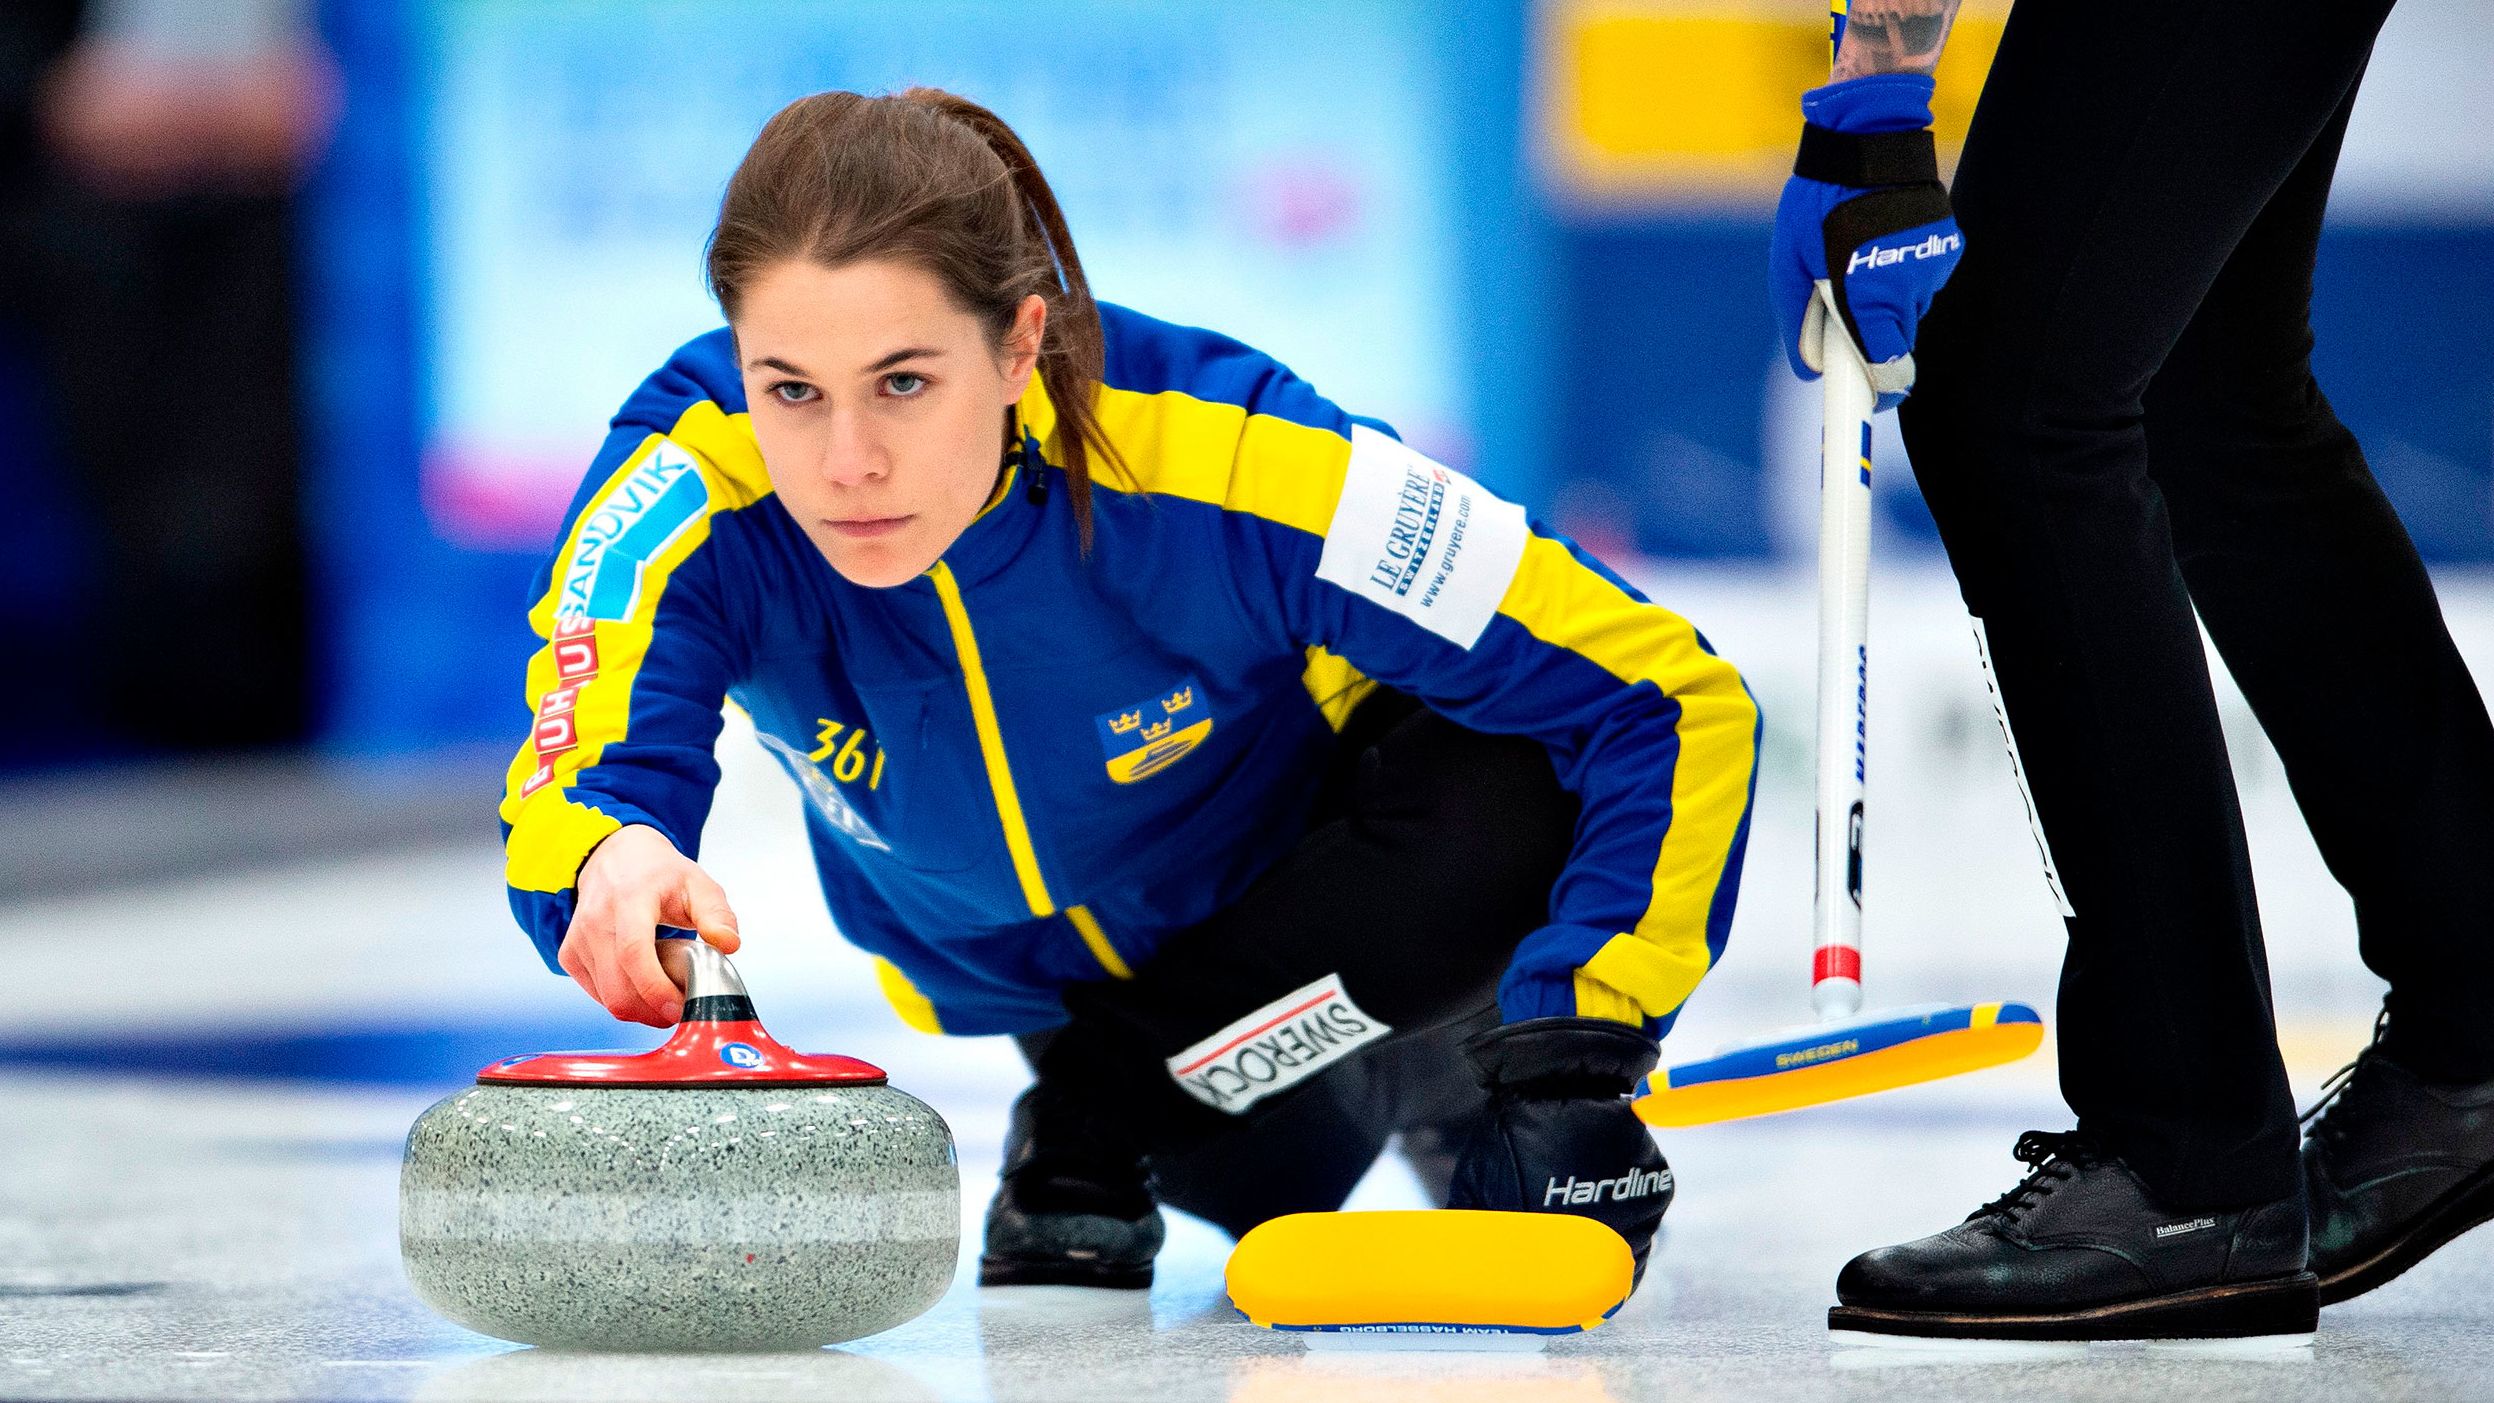 <strong>Anna Hasselborg (Sweden):</strong> Hasselborg, 32, was the skip of the gold-medal-winning curling team at the 2018 Olympics in South Korea. She'll be back in China along with teammates Sara McManus, Agnes Knochenhauer and Sofia Maberg. Swedish women have won three curling golds at the Olympics, the most of any nation.